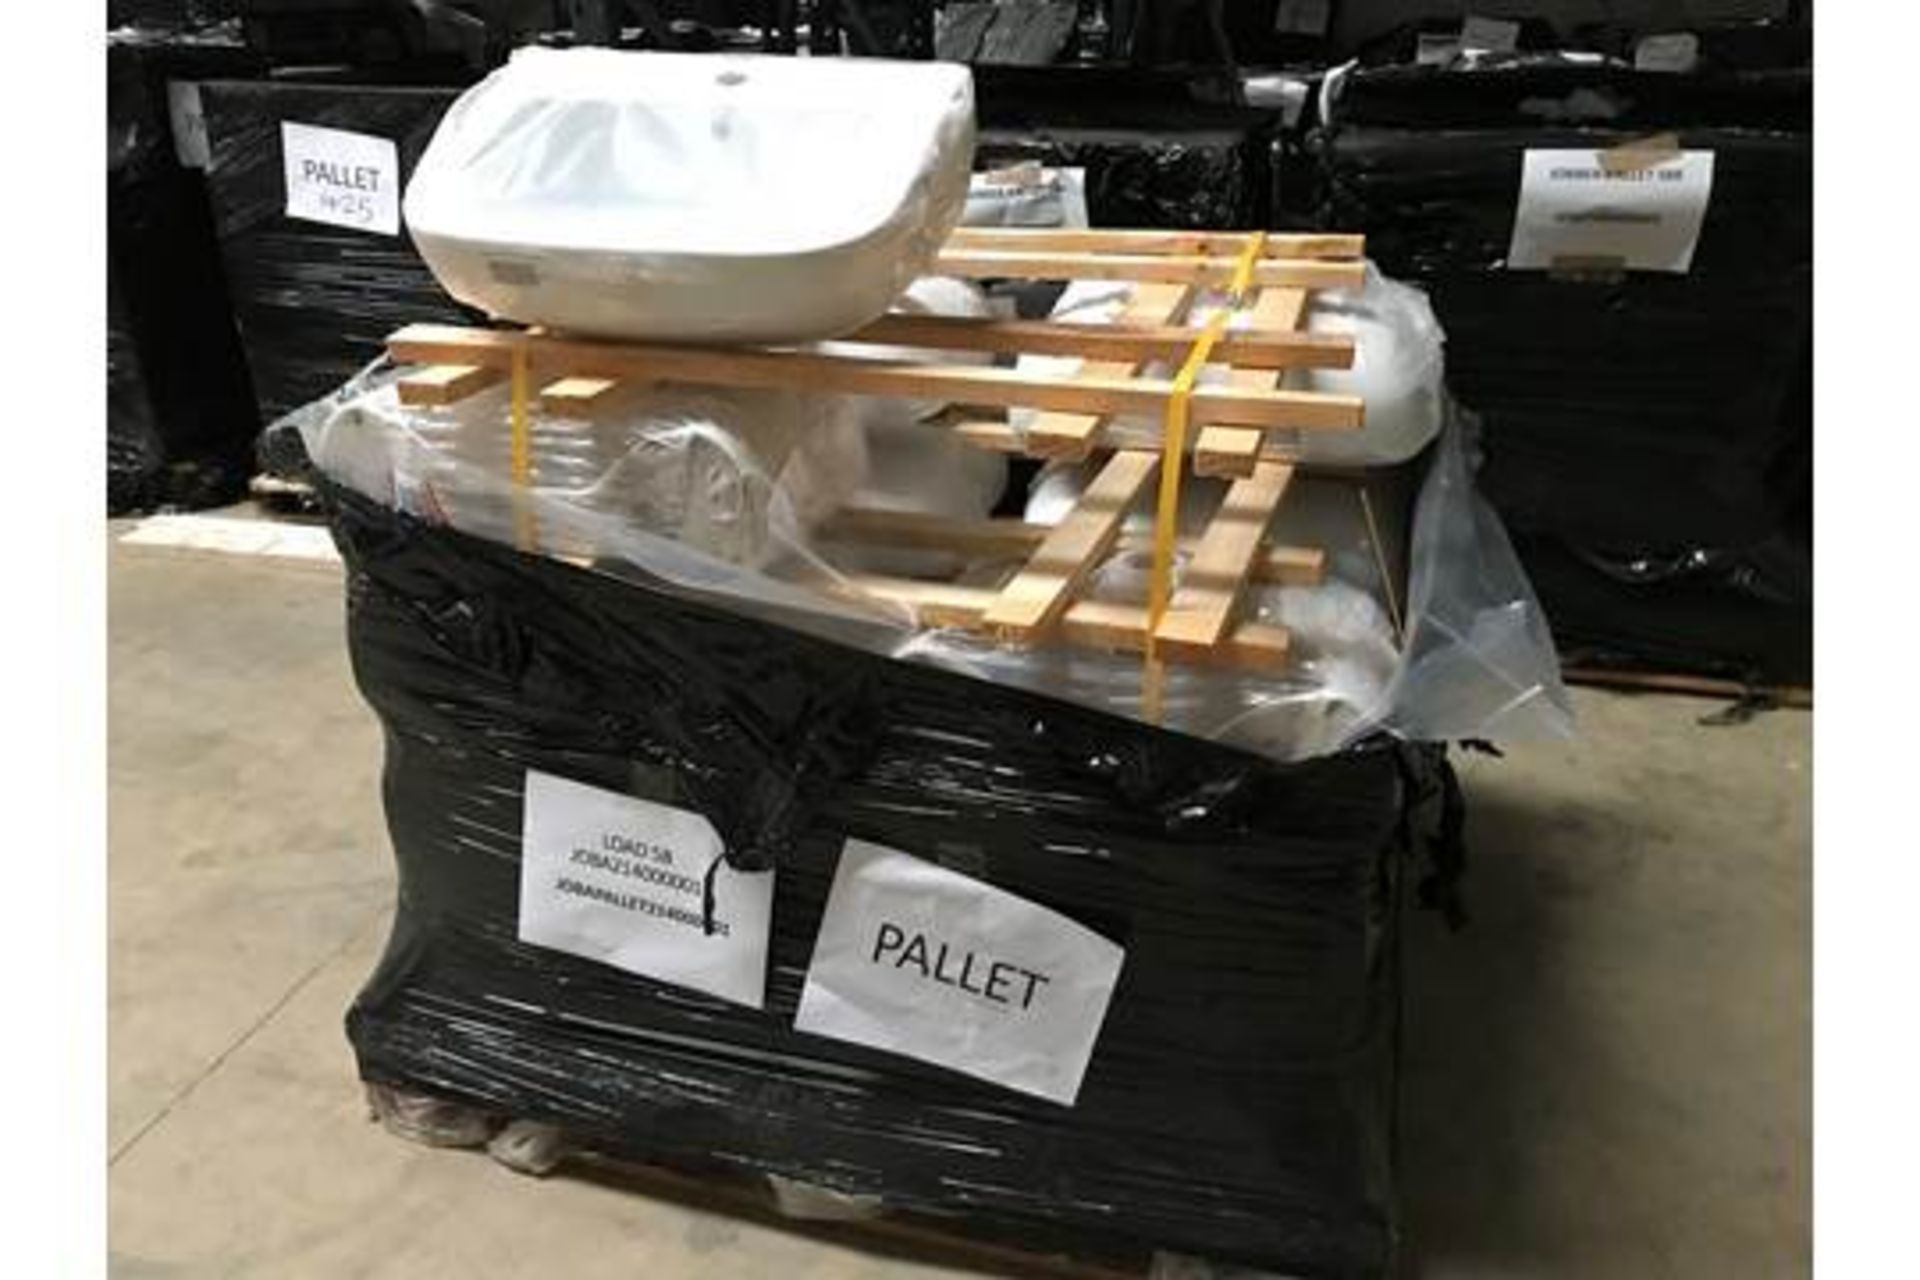 Pallet 267 - 16 x Phase Short Projection Basin - Image 3 of 3